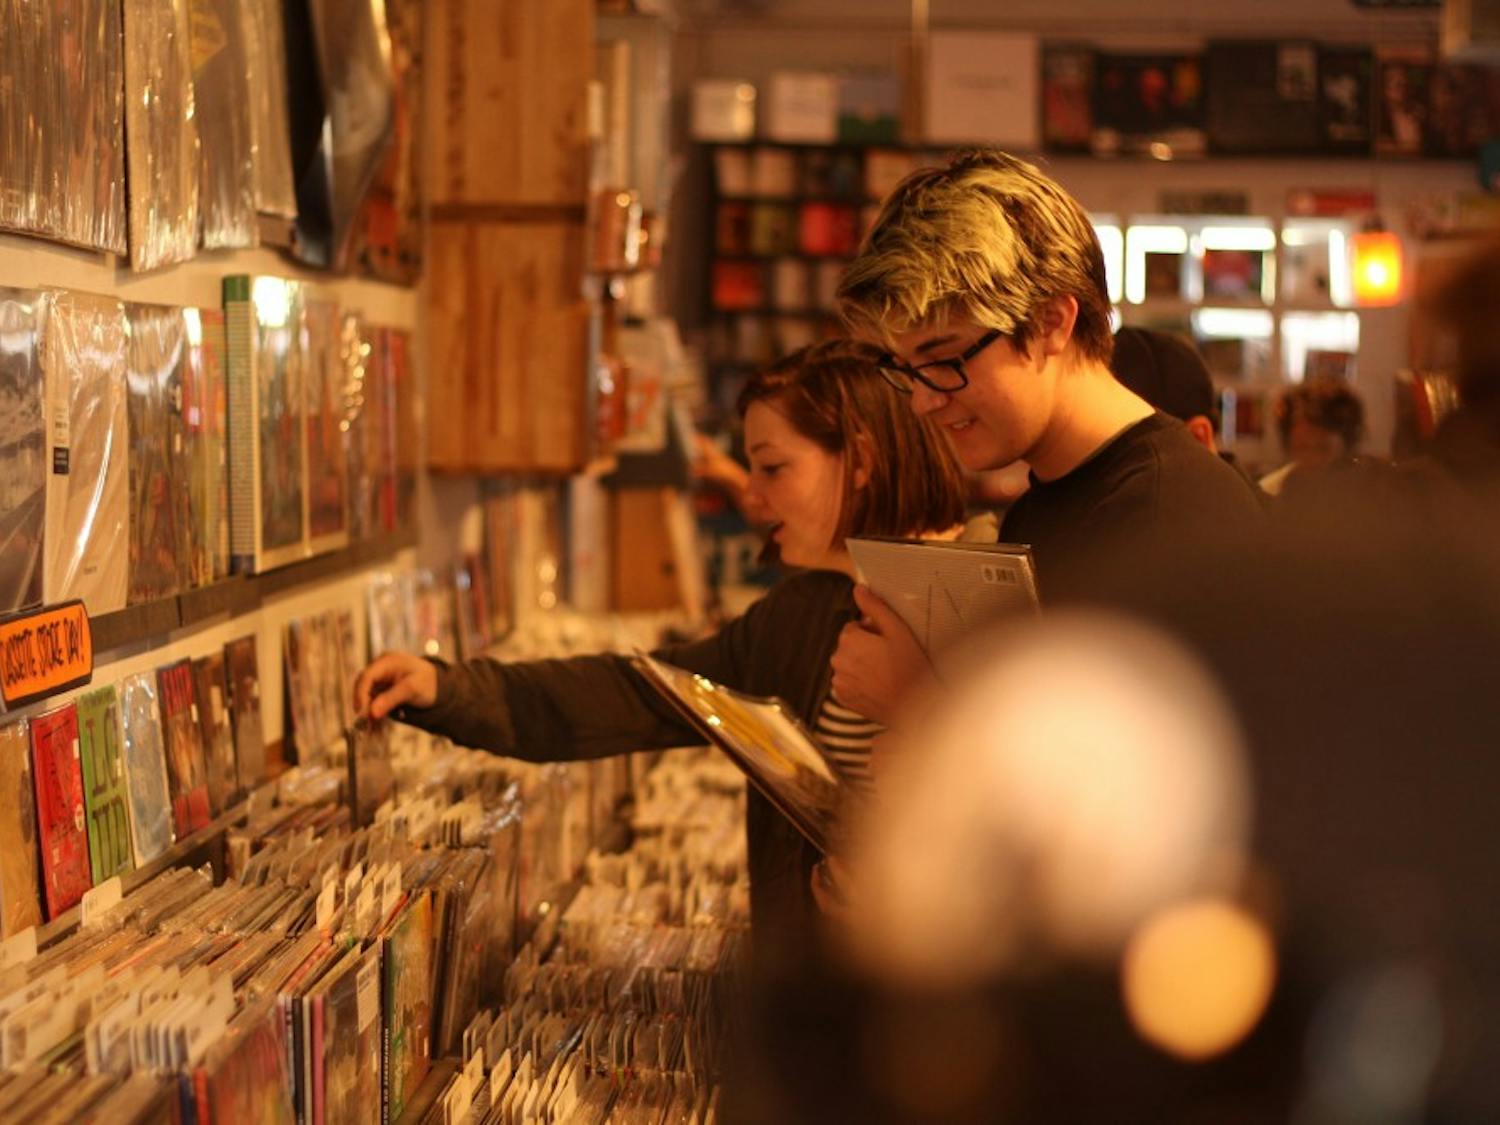 People shop for records on Black Friday Record Store day at Stinkweeds Records on 12 W. Camelback Rd in Phoenix. (Photo by Zane Jennings)